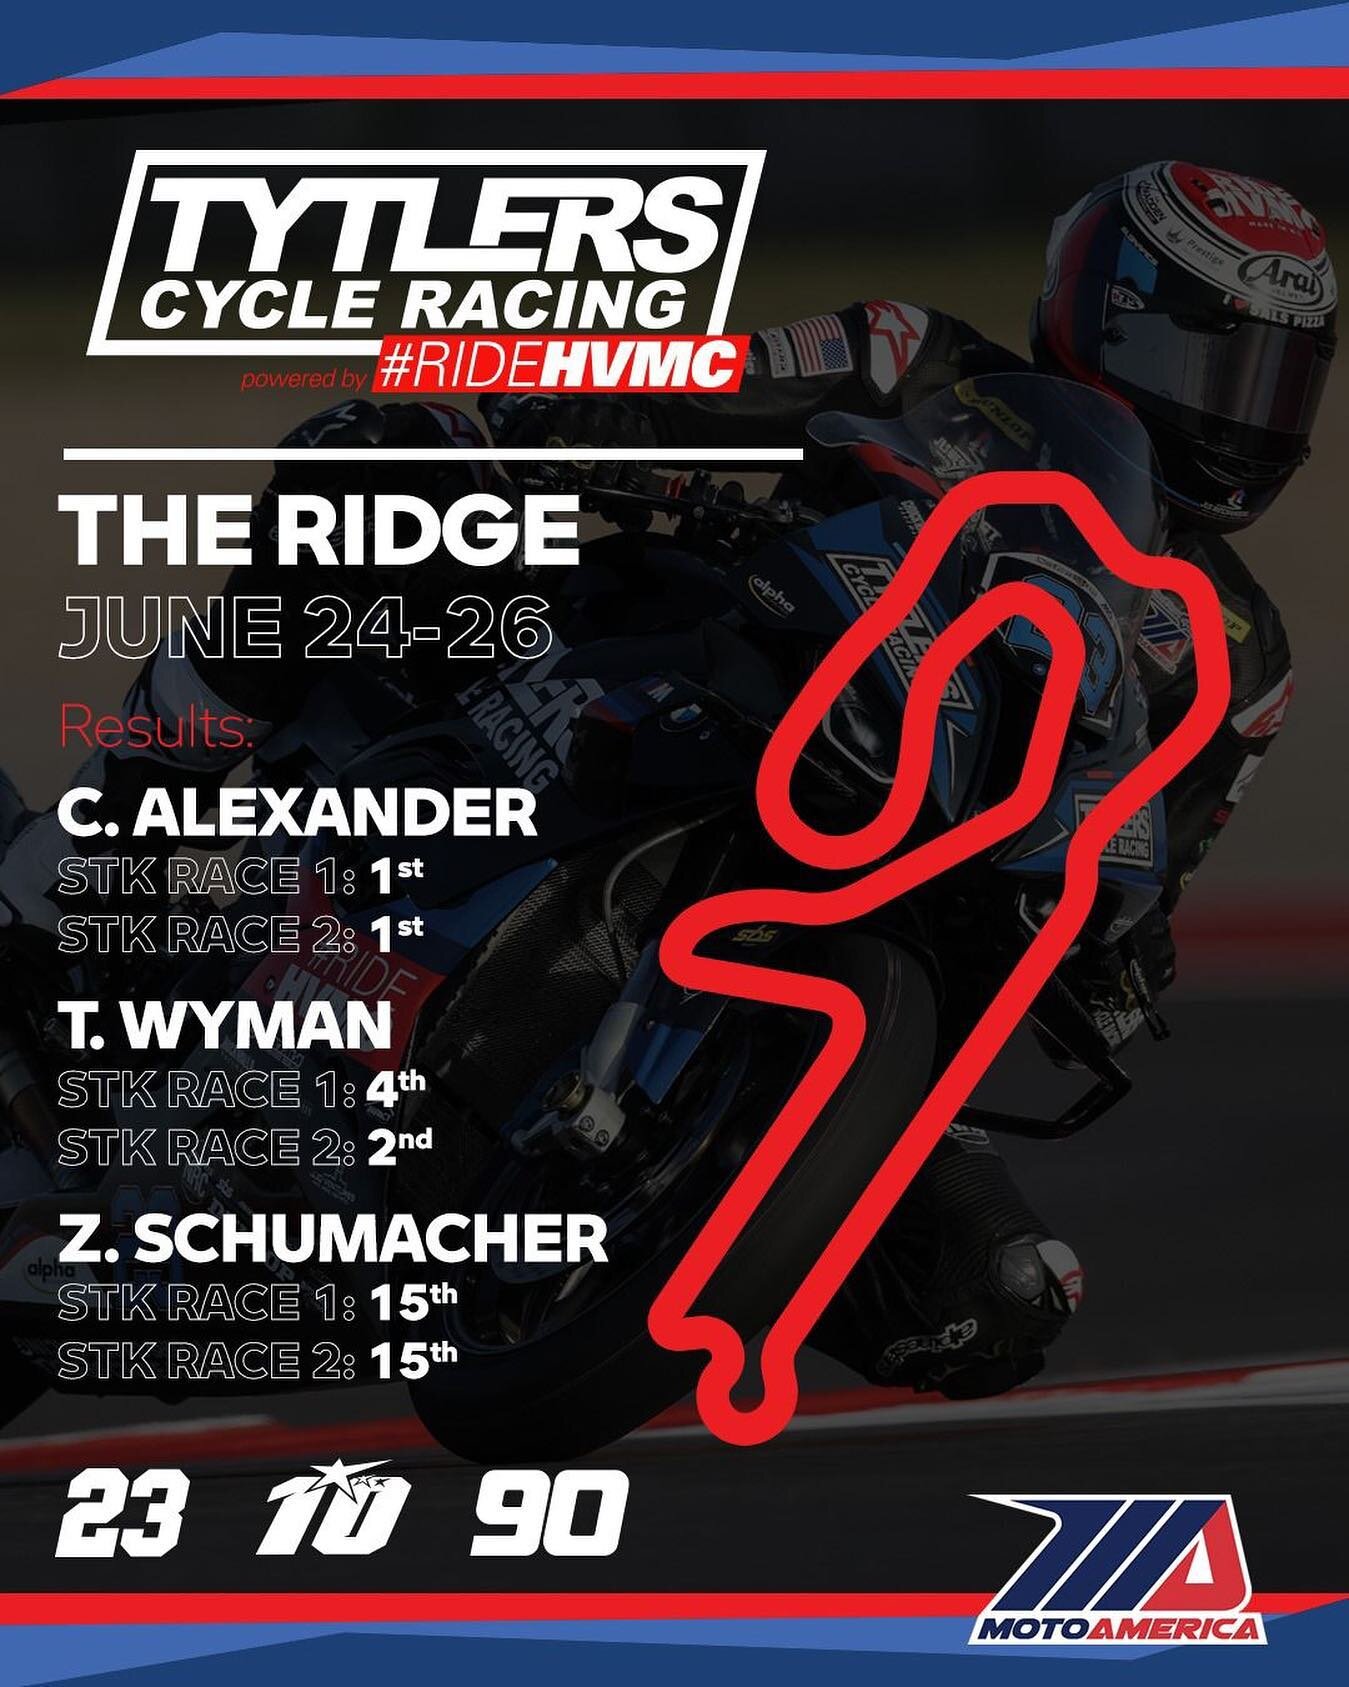 &ldquo;The Tytlers Cycle RideHVMC squad continued their run of form in the 2022 MotoAmerica Stock1000 championship - the latest round of the series at The Ridge in Washington state seeing Corey Alexander romp to a double victory after smashing the la